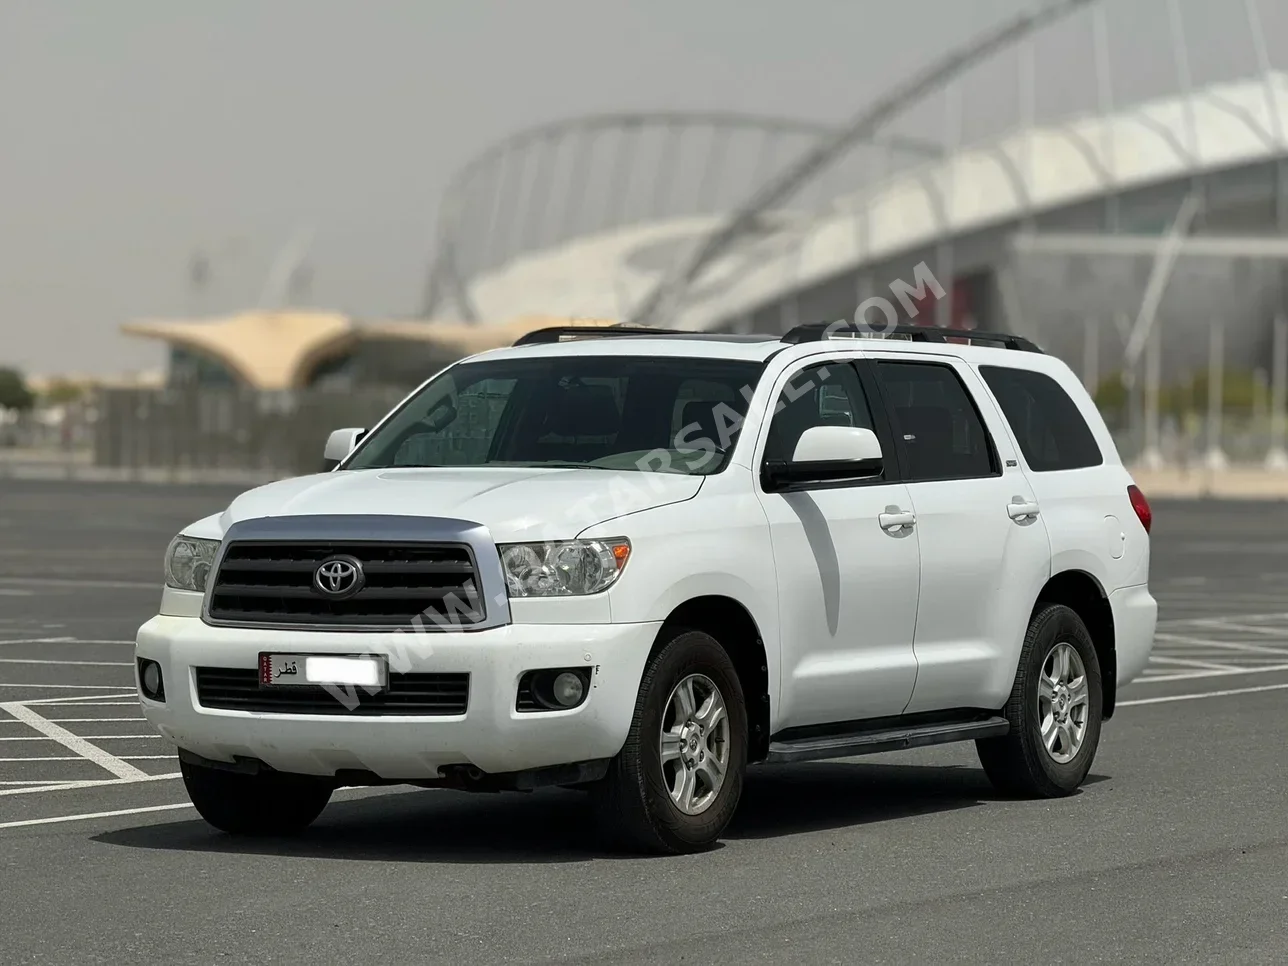 Toyota  Sequoia  SR5  2013  Automatic  387,000 Km  8 Cylinder  Four Wheel Drive (4WD)  SUV  White